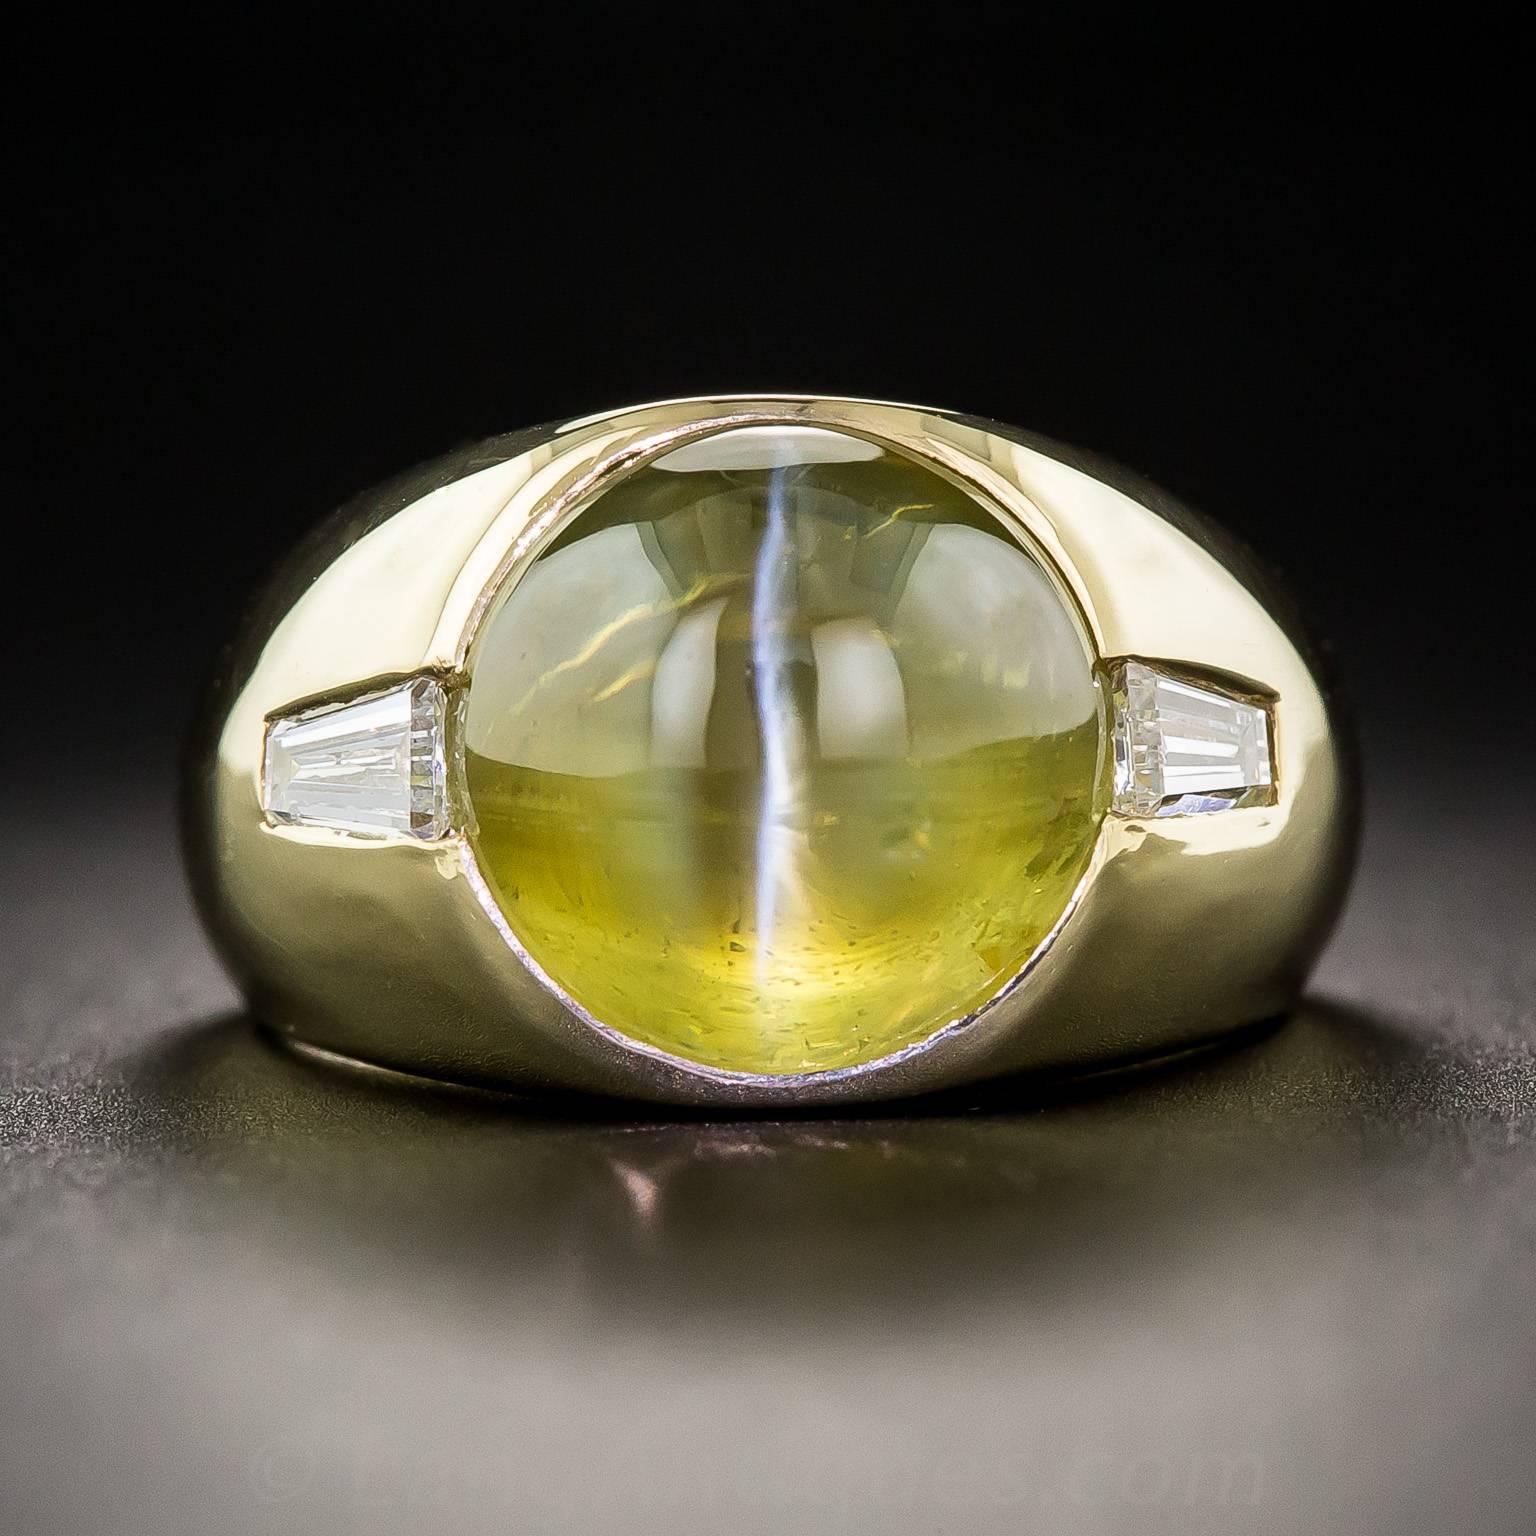 Imbued with a glowing, crystalline, honey-colored hue (with just a touch of khaki green), this perfectly proportioned chrysoberyl cat's-eye, weighing 10 carats, winks its straight white eye from between a pair of bright white tapered baguette